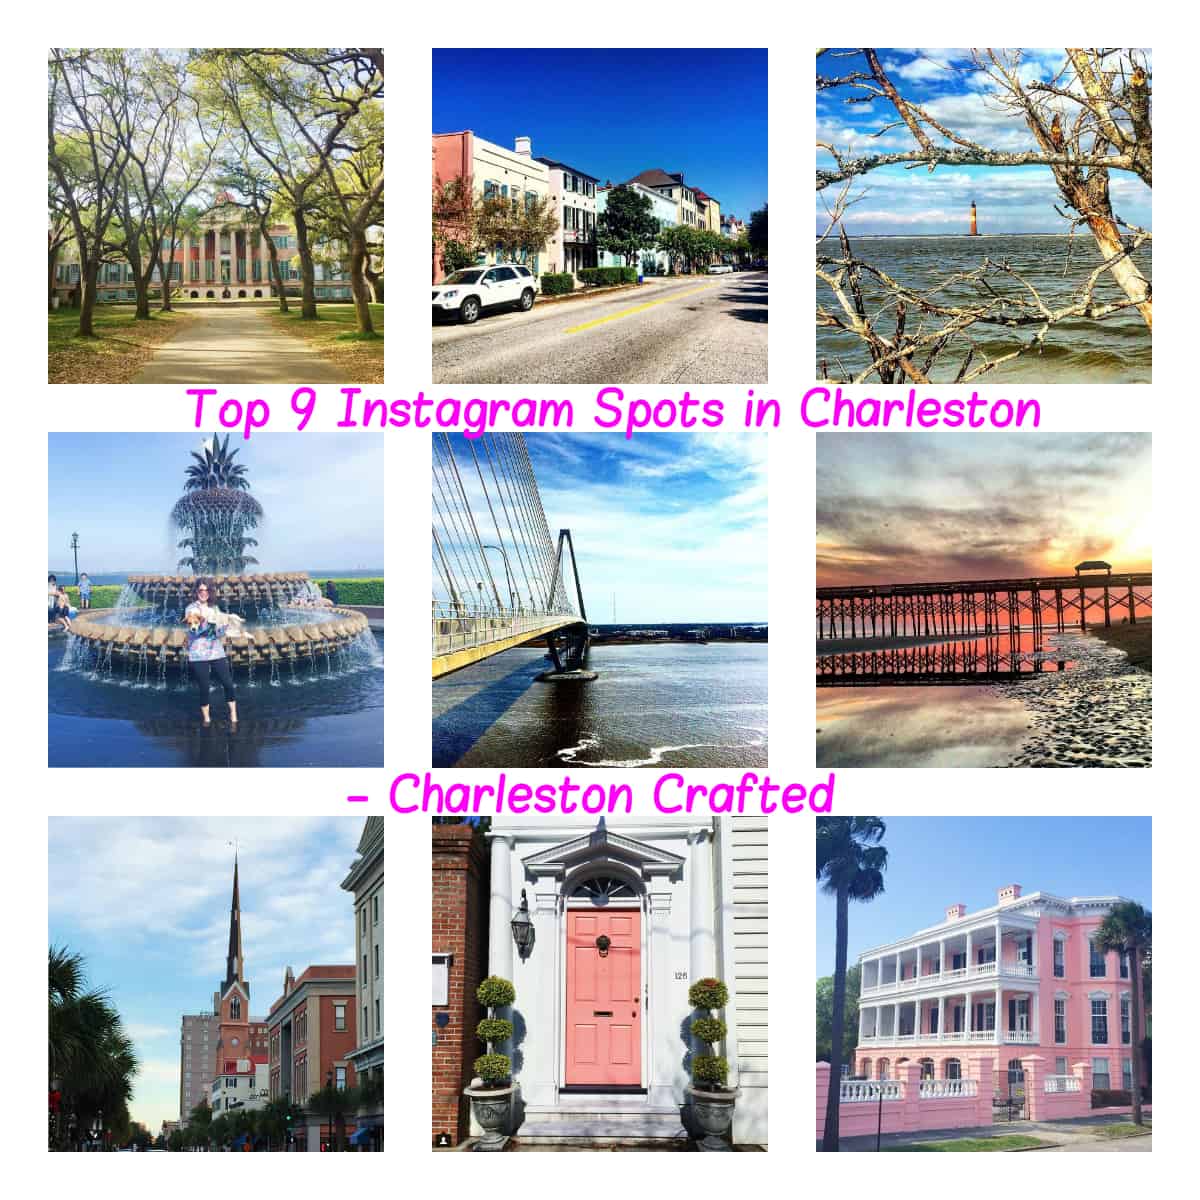 10 Most Instagrammable Places in Charleston - Where to Take Stunning Photos  of Charleston to Impress Your Friends? – Go Guides